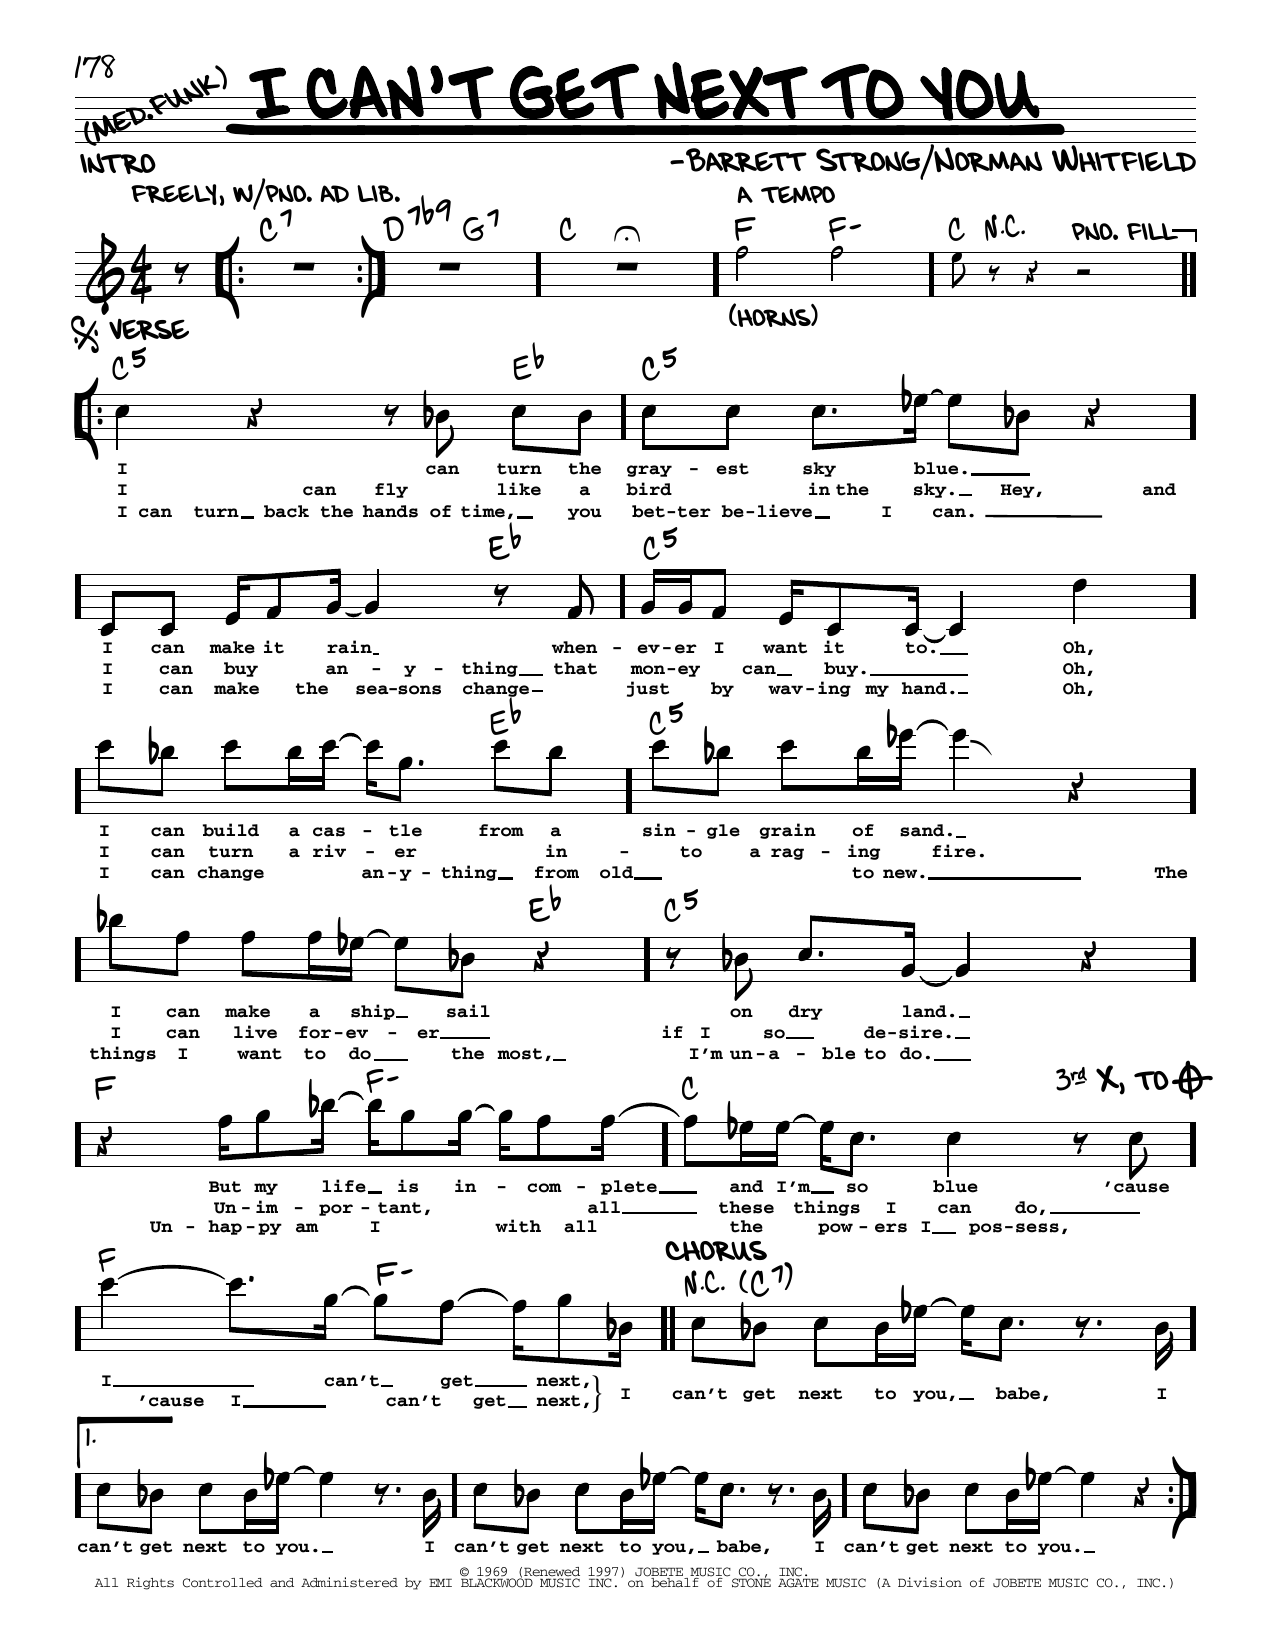 Download The Temptations I Can't Get Next To You Sheet Music